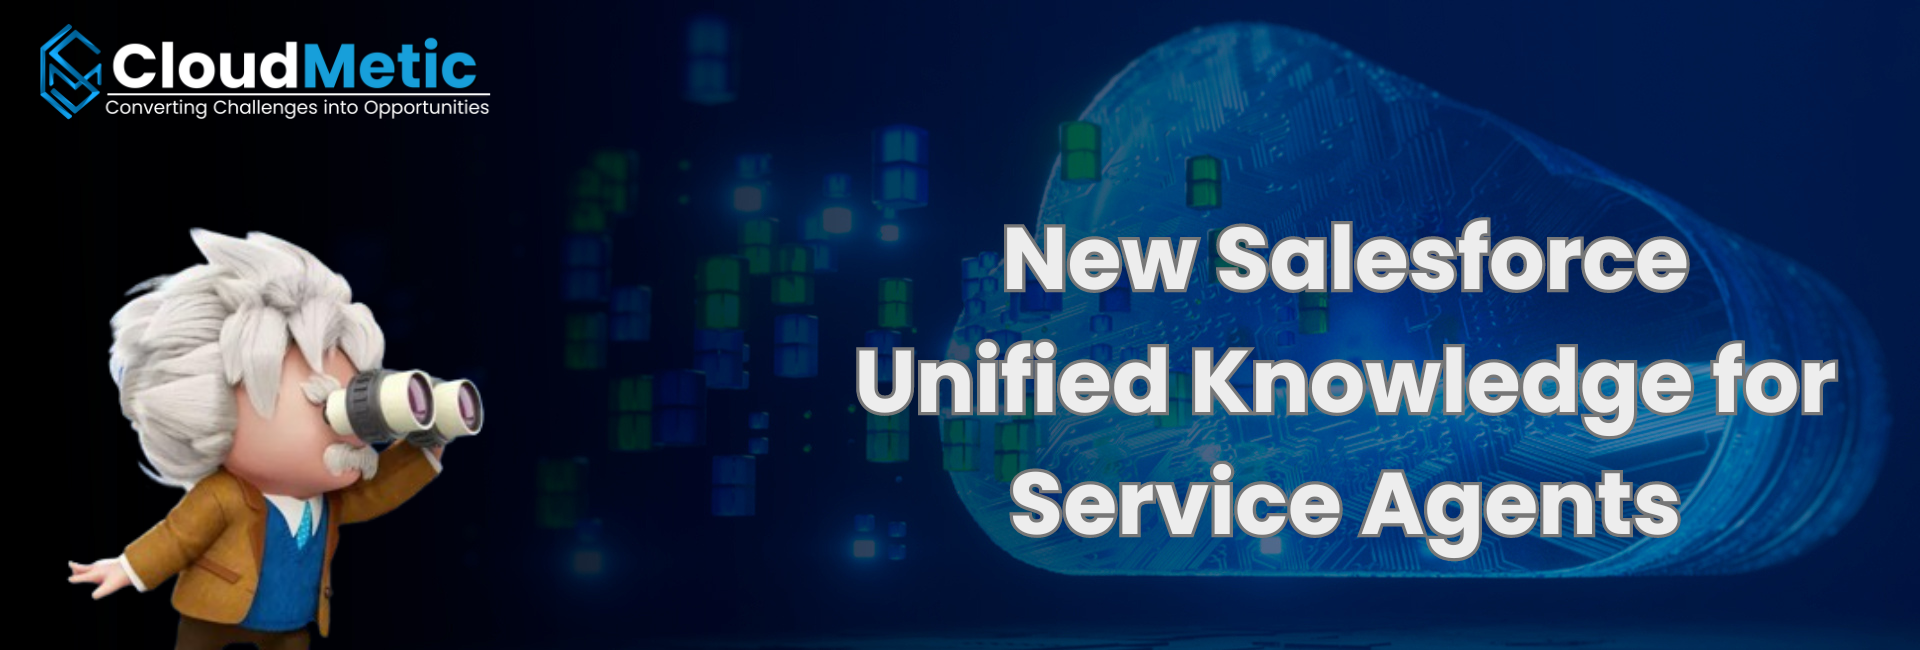 New Salesforce Unified Knowledge for Service Agents